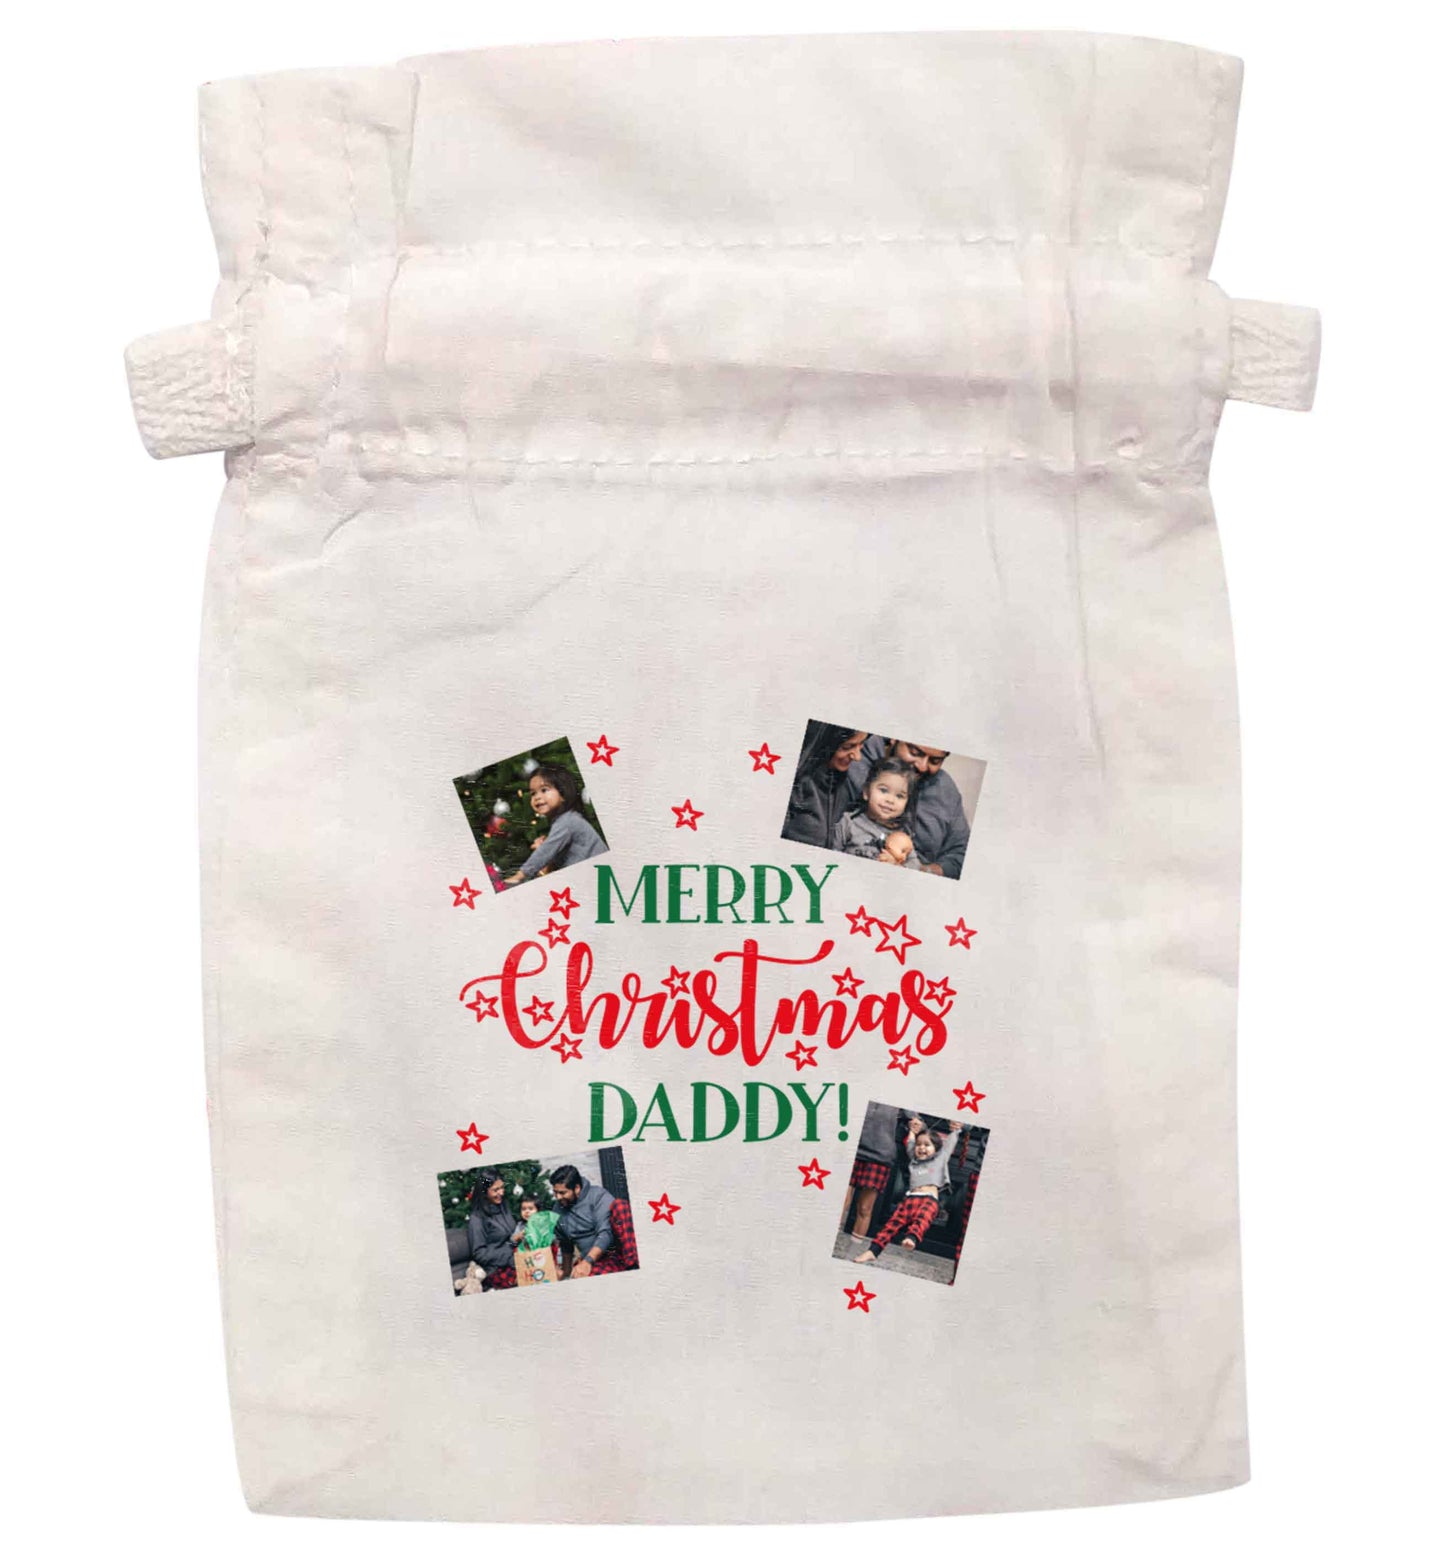 Merry Christmas daddy | XS - L | Pouch / Drawstring bag / Sack | Organic Cotton | Bulk discounts available!